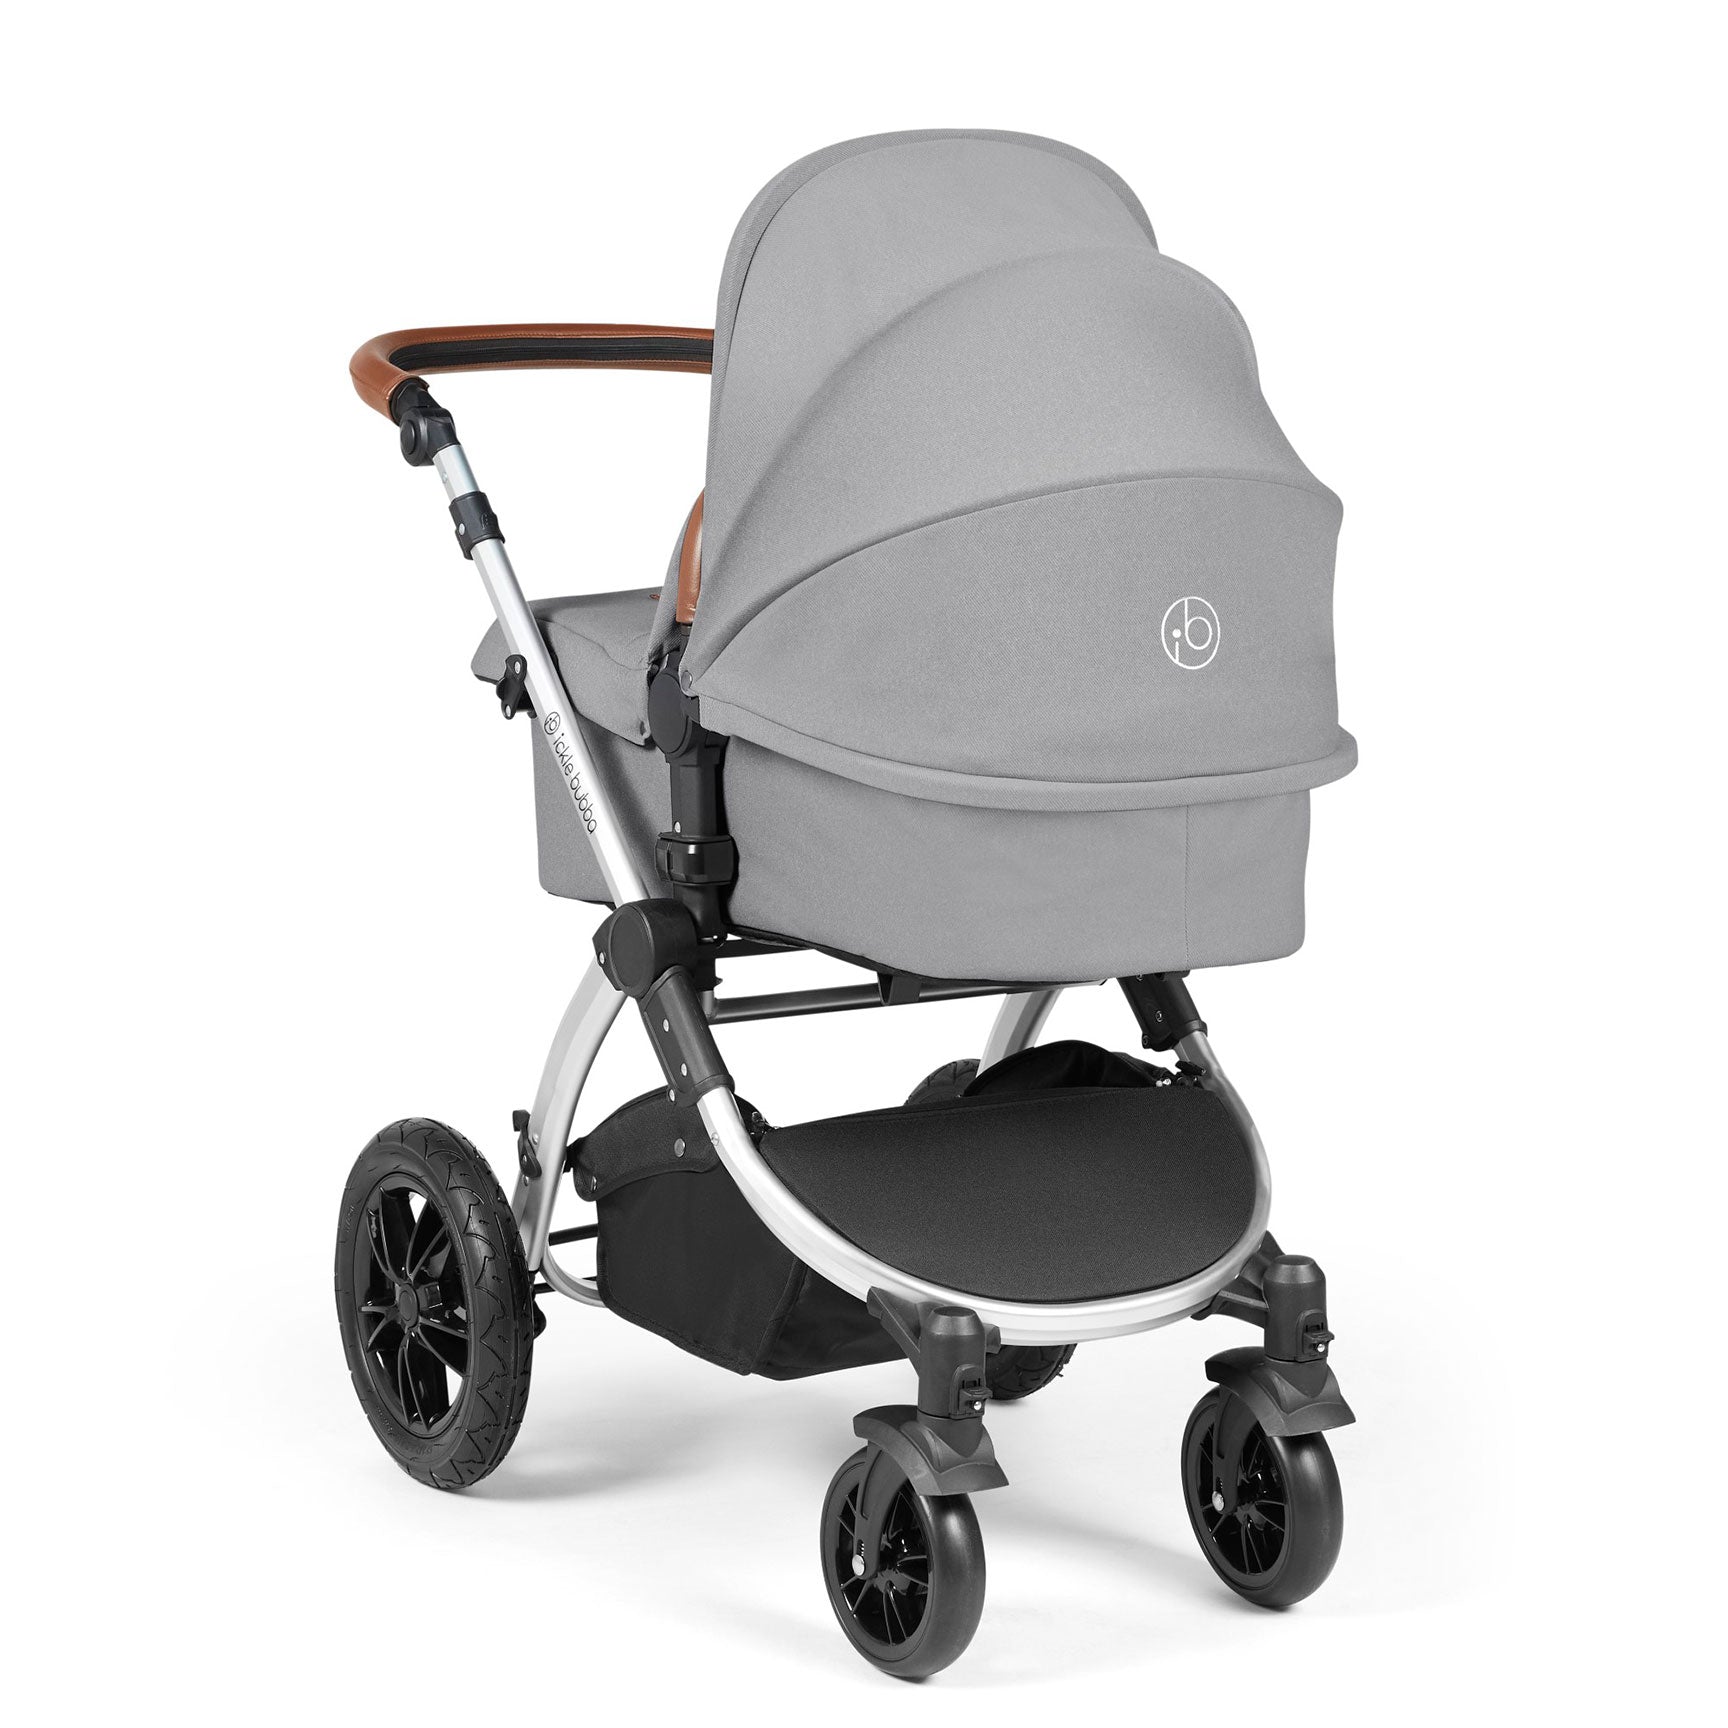 Ickle Bubba travel systems Ickle Bubba Stomp Luxe 2 in 1 Plus Pushchair & Carrycot - Silver/Pearl Grey/Tan 10-003-001-260